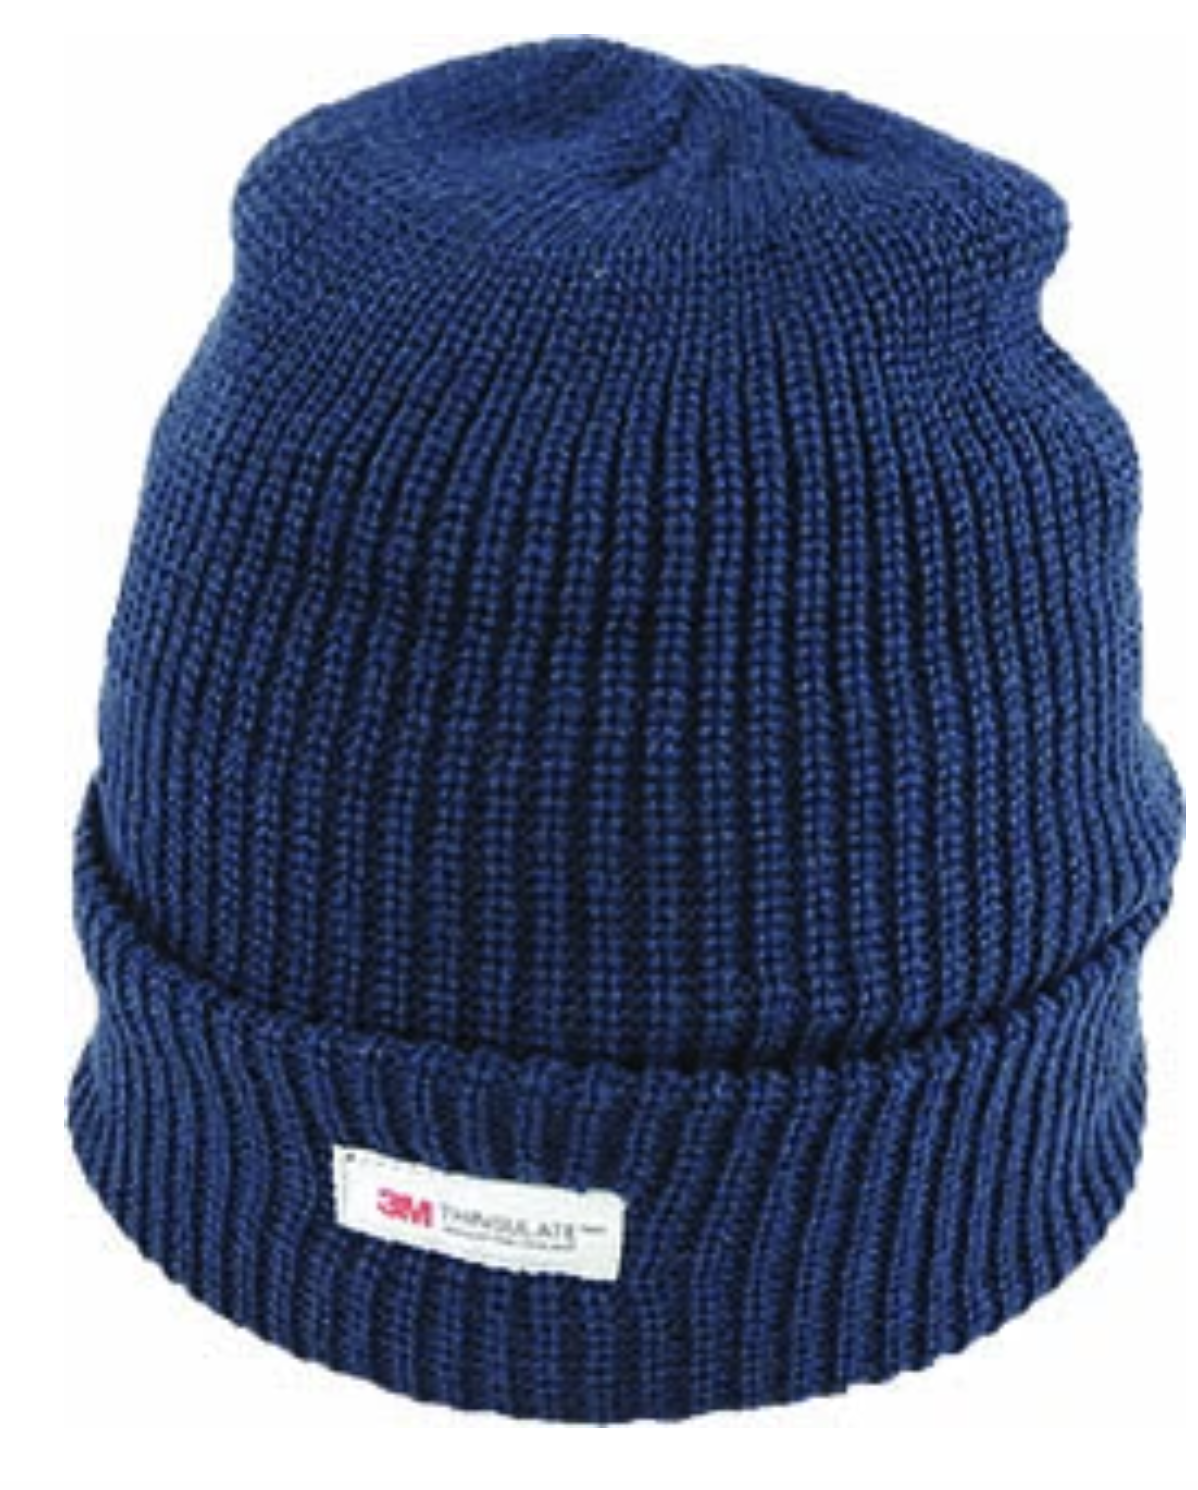 THINSULATE Acrylic Rib Knit BEANIE Hat Winter Thermal Lined Warmer Snow Ski - Navy Blue